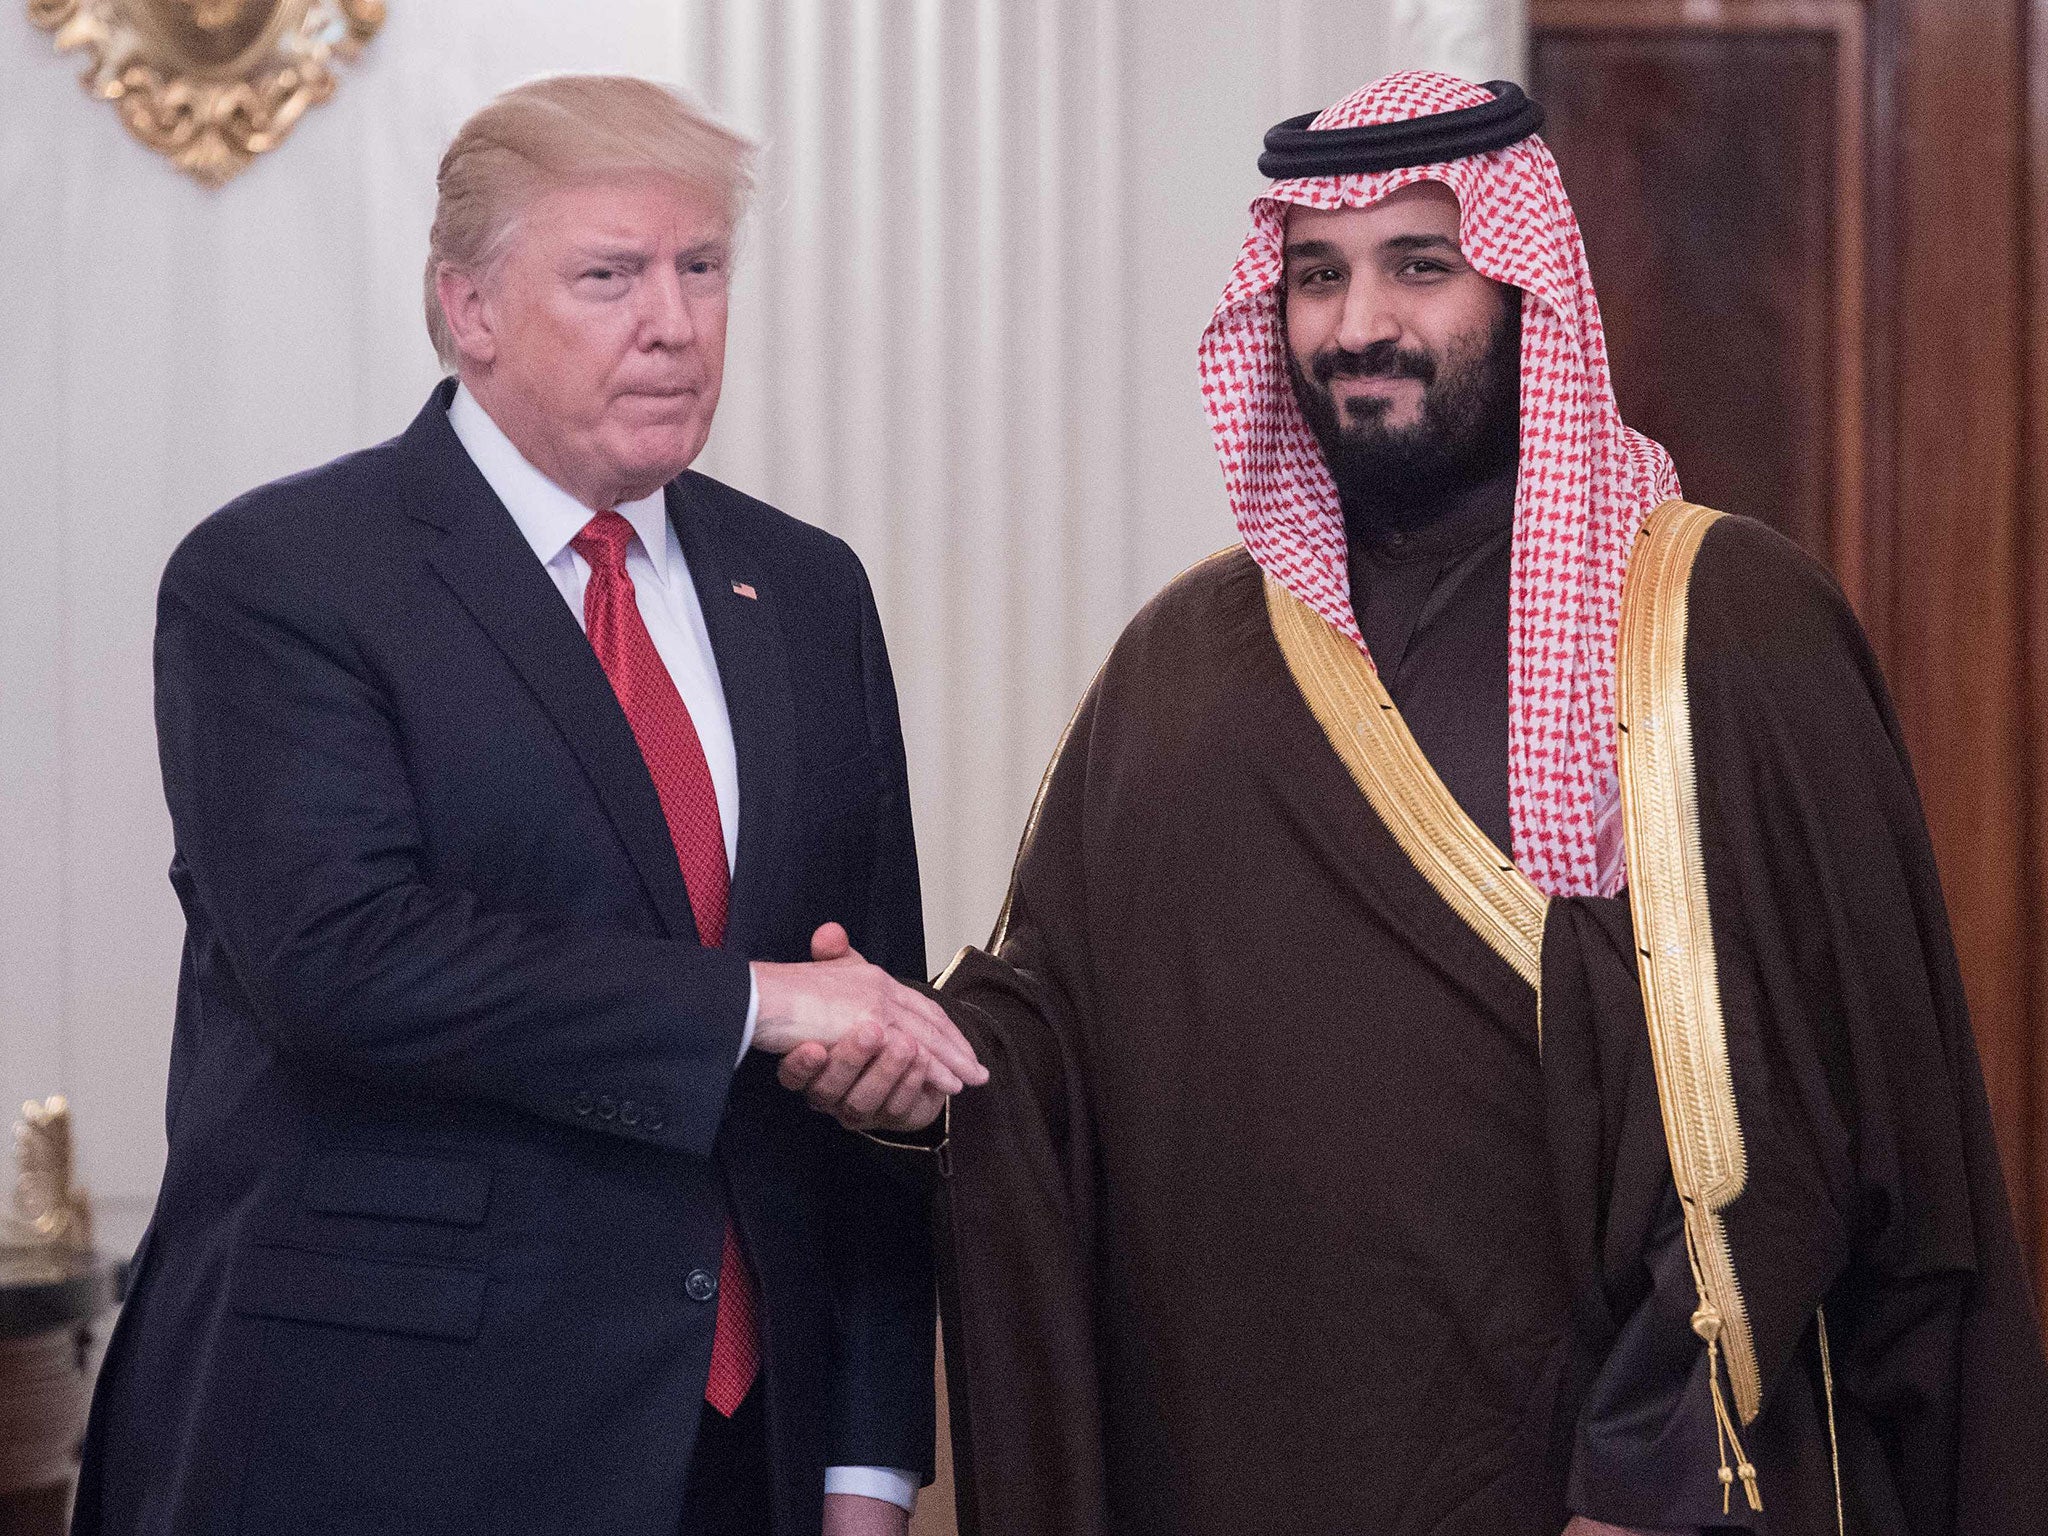 US President Donald Trump and Saudi Deputy Crown Prince and defence minister Mohammed bin Salman at the White House on 14 March